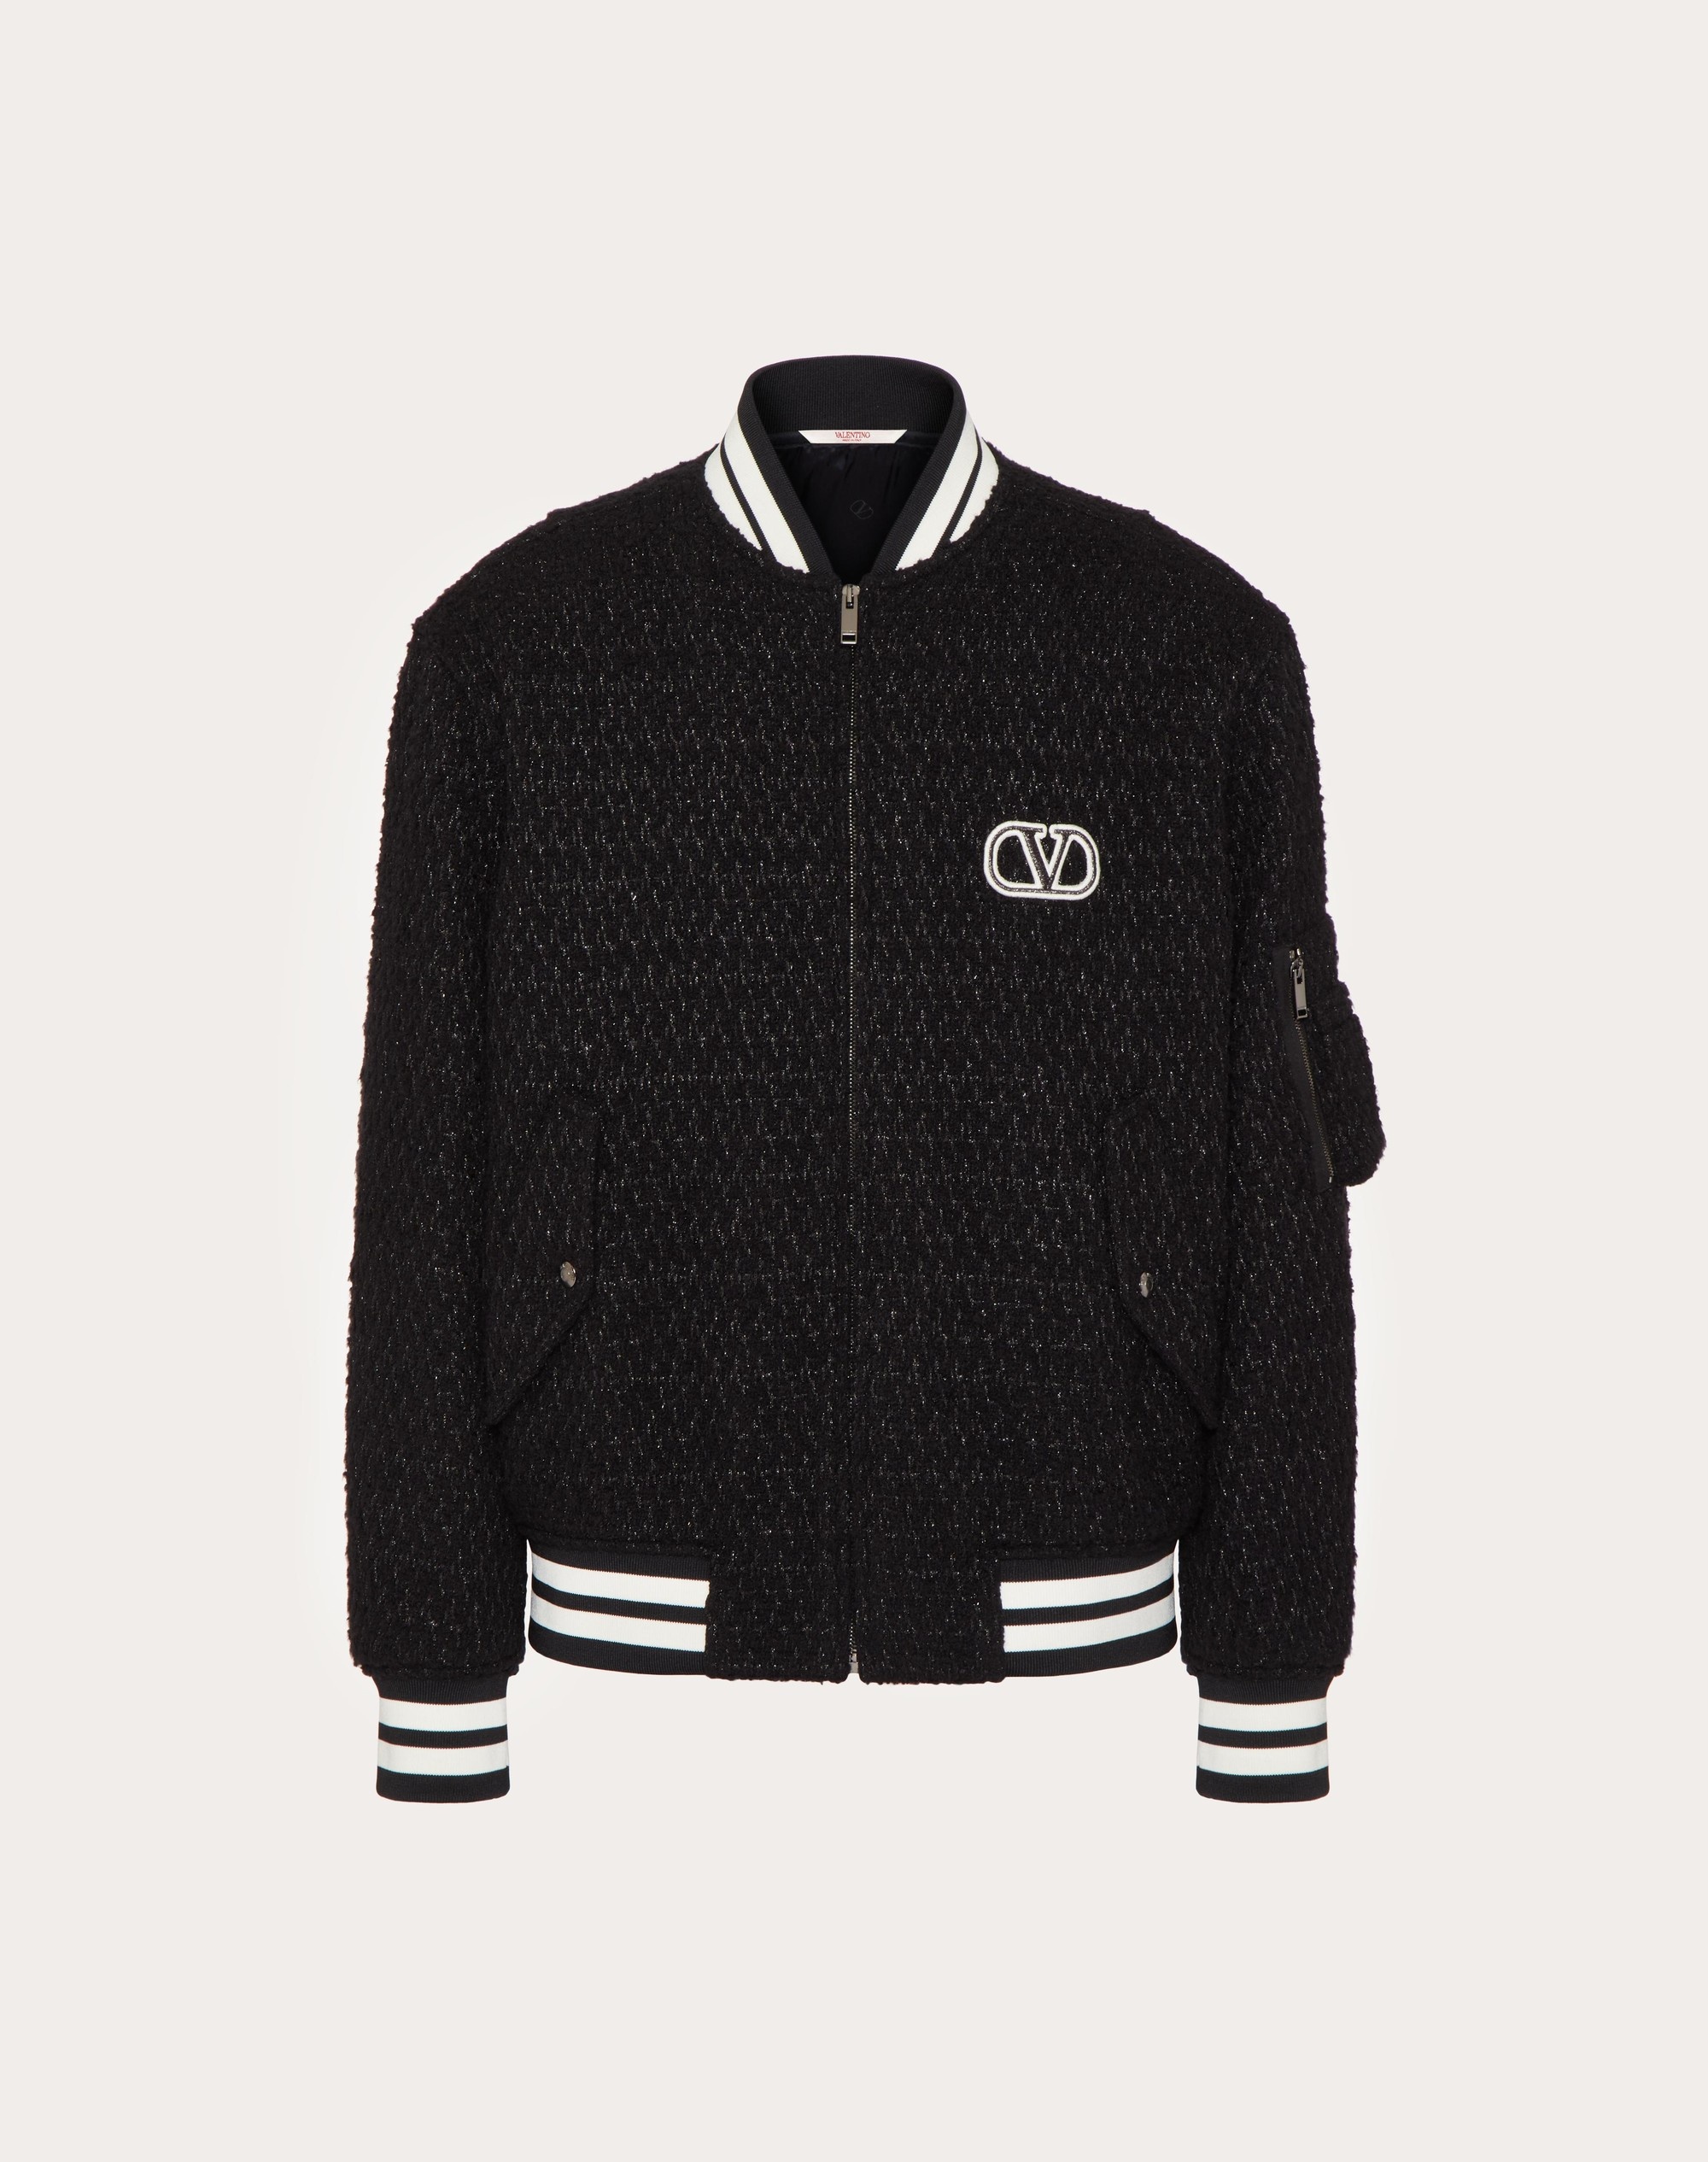 LUREX WOOL TWEED BOMBER JACKET WITH VLOGO SIGNATURE PATCH - 1